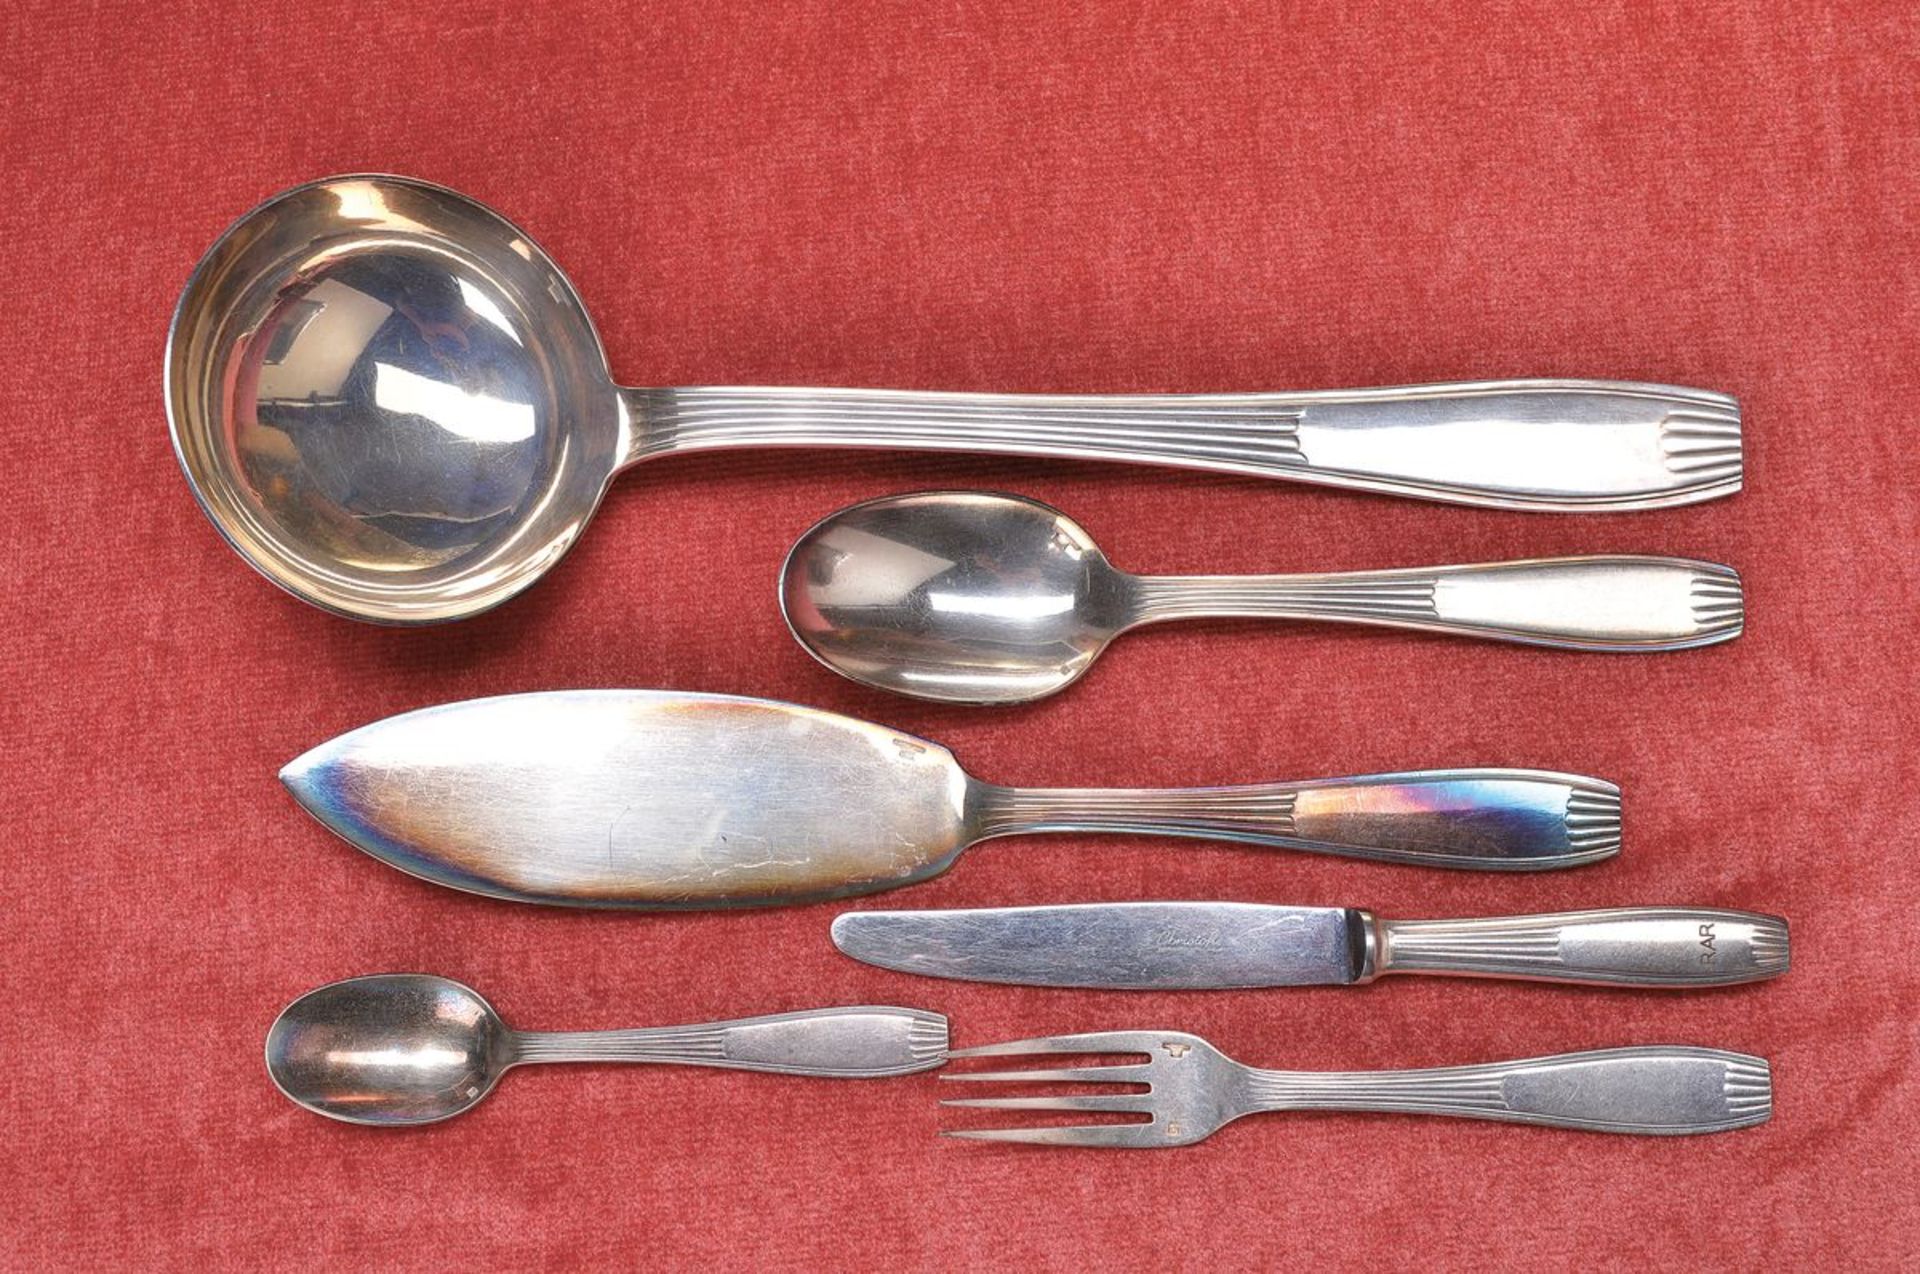 cutlery, Christofle, designed by 1930s, silverplated metal: 6 forks, 6 knives, 6 soup spoons, 6